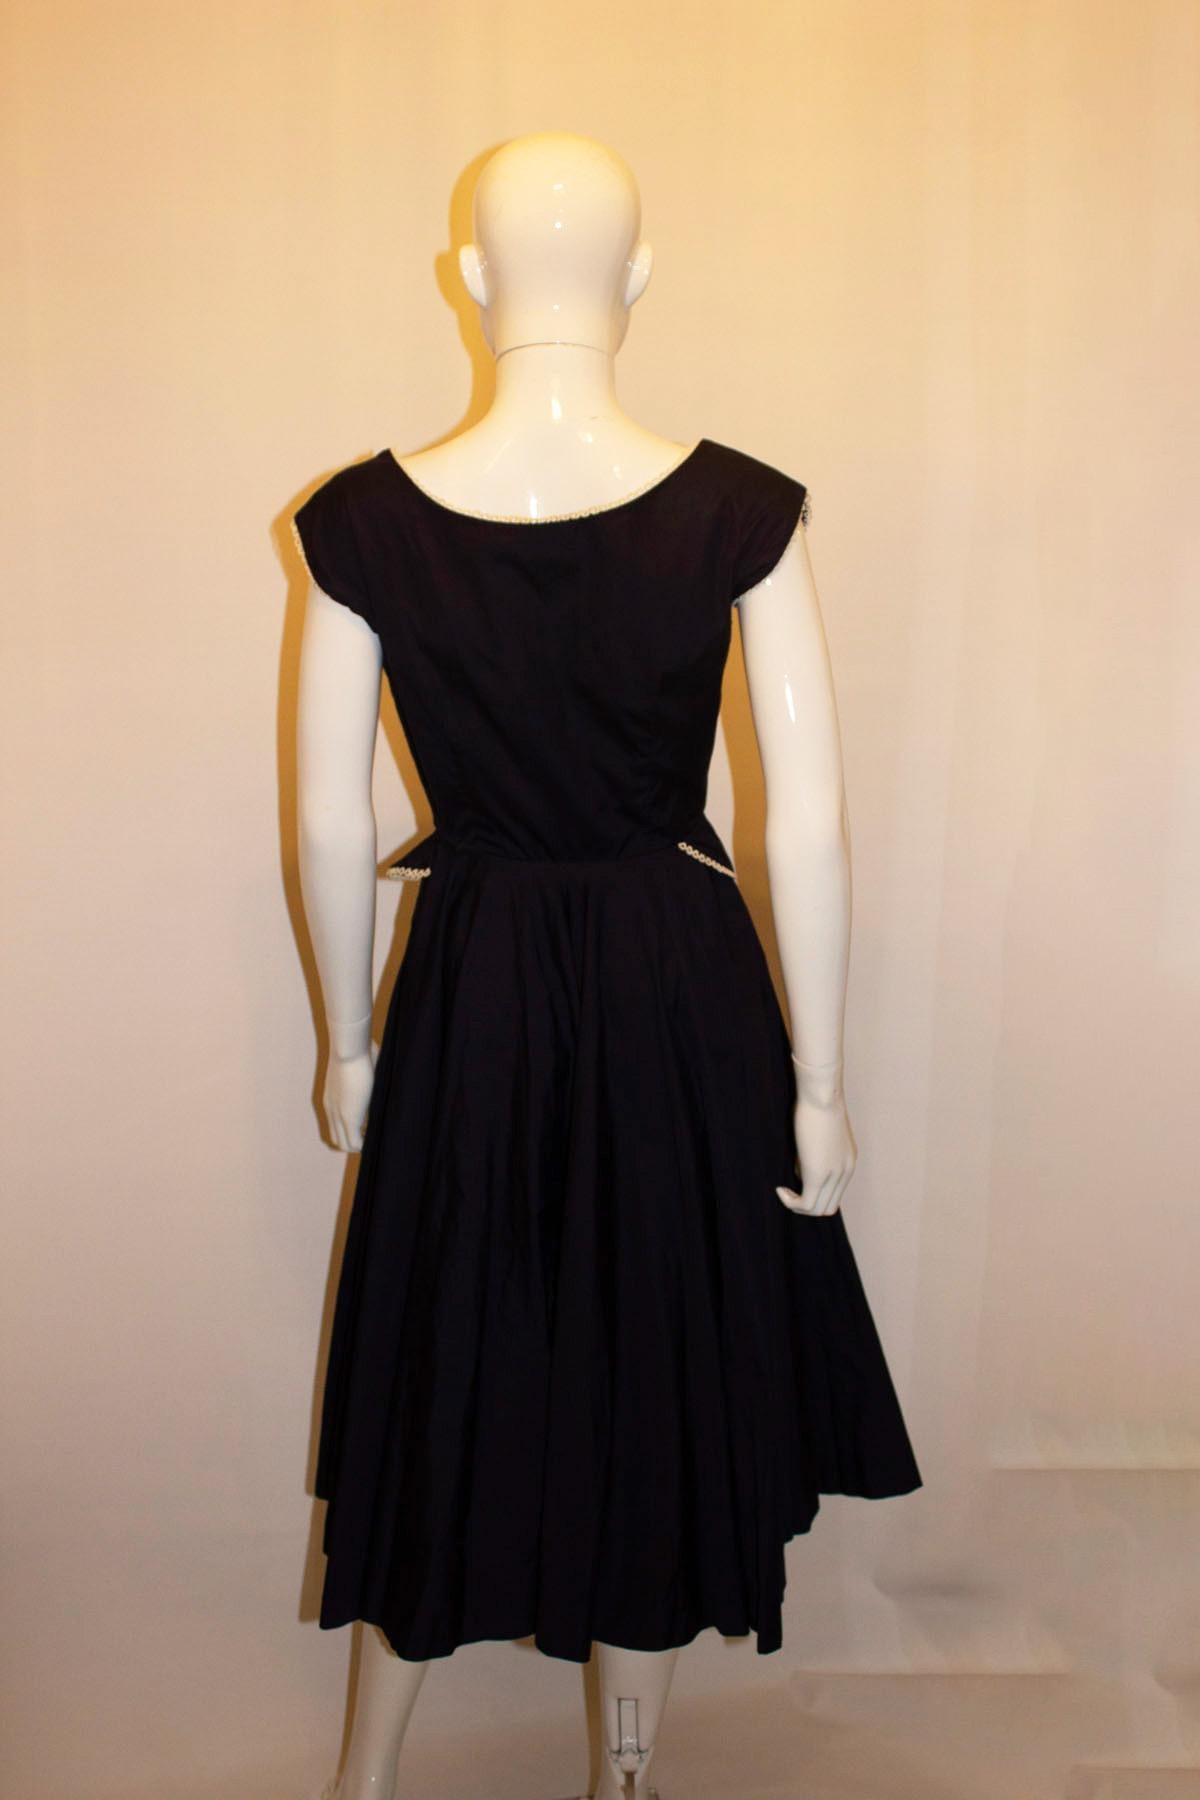 A great vintage day dress by  Horrockses.  The dress is in blue cotton with white detail. It has a wonderful flared skirt, great for dancing,  side zip opening, boat neckline and detail at the waist. 
Size 12 , Measurements: Bust 36'', waist 25'',